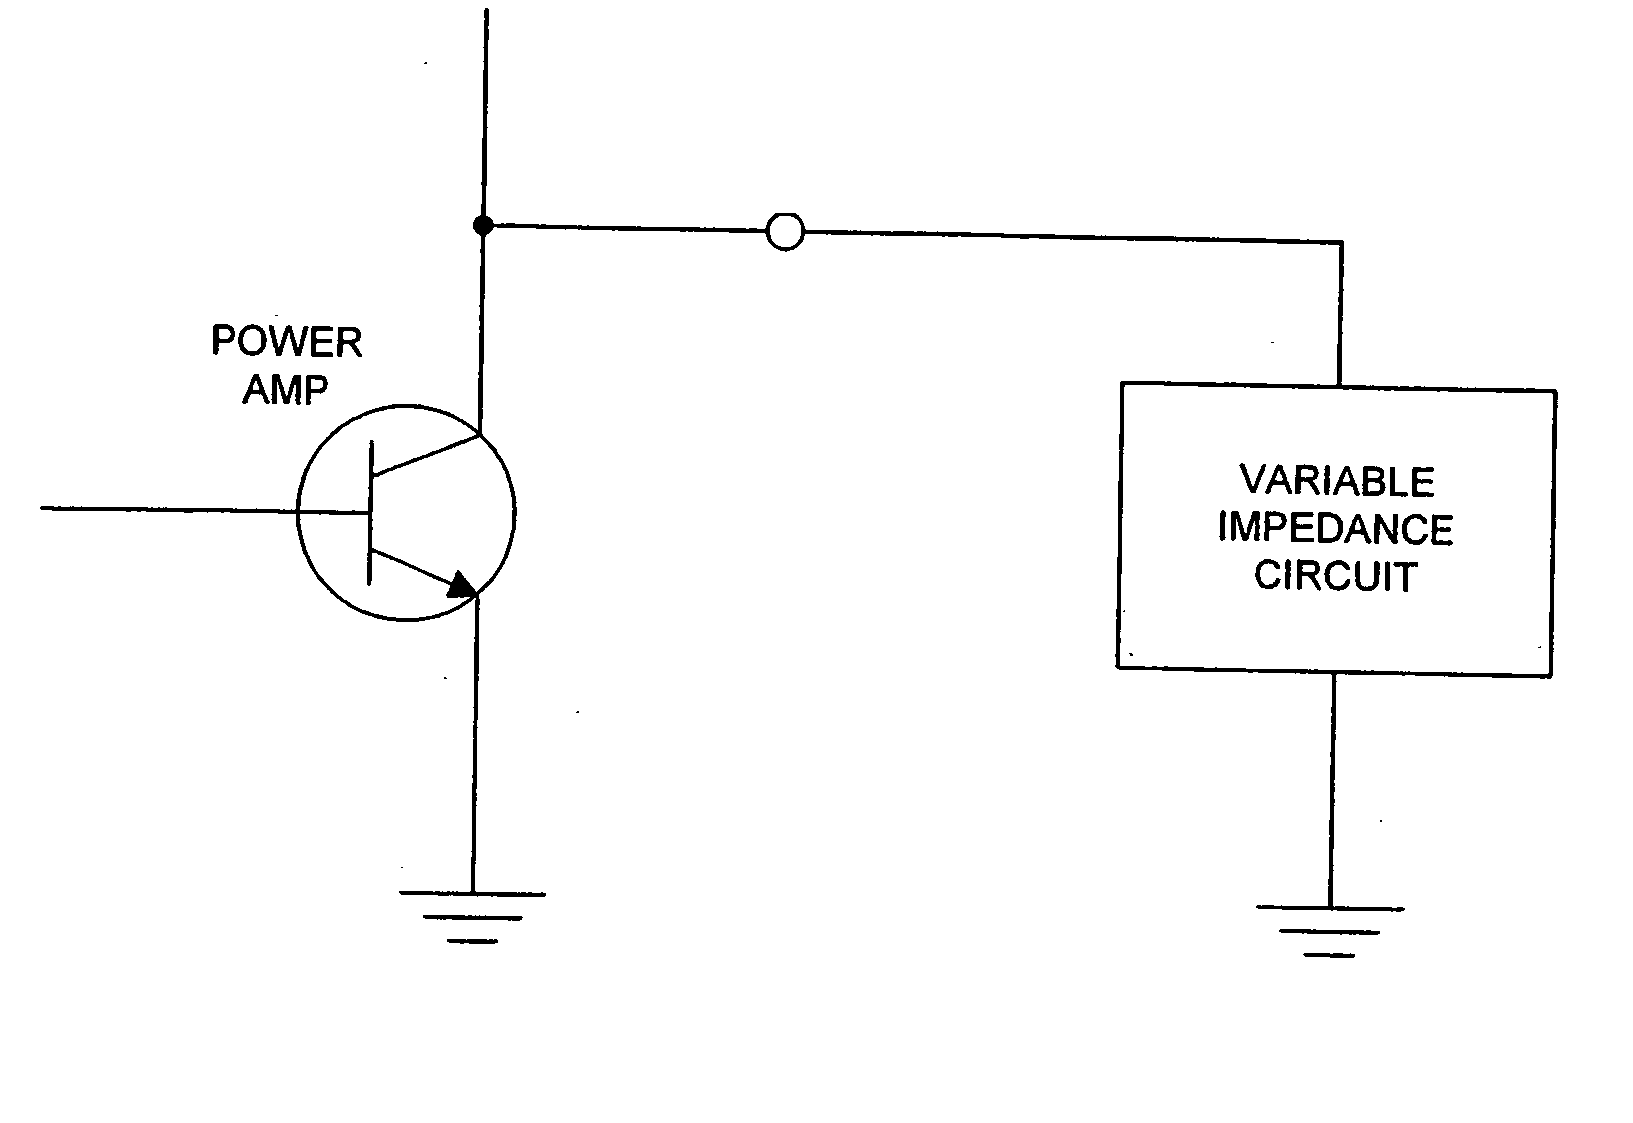 Self-tuning variable impedance circuit for impedance matching of power amplifiers